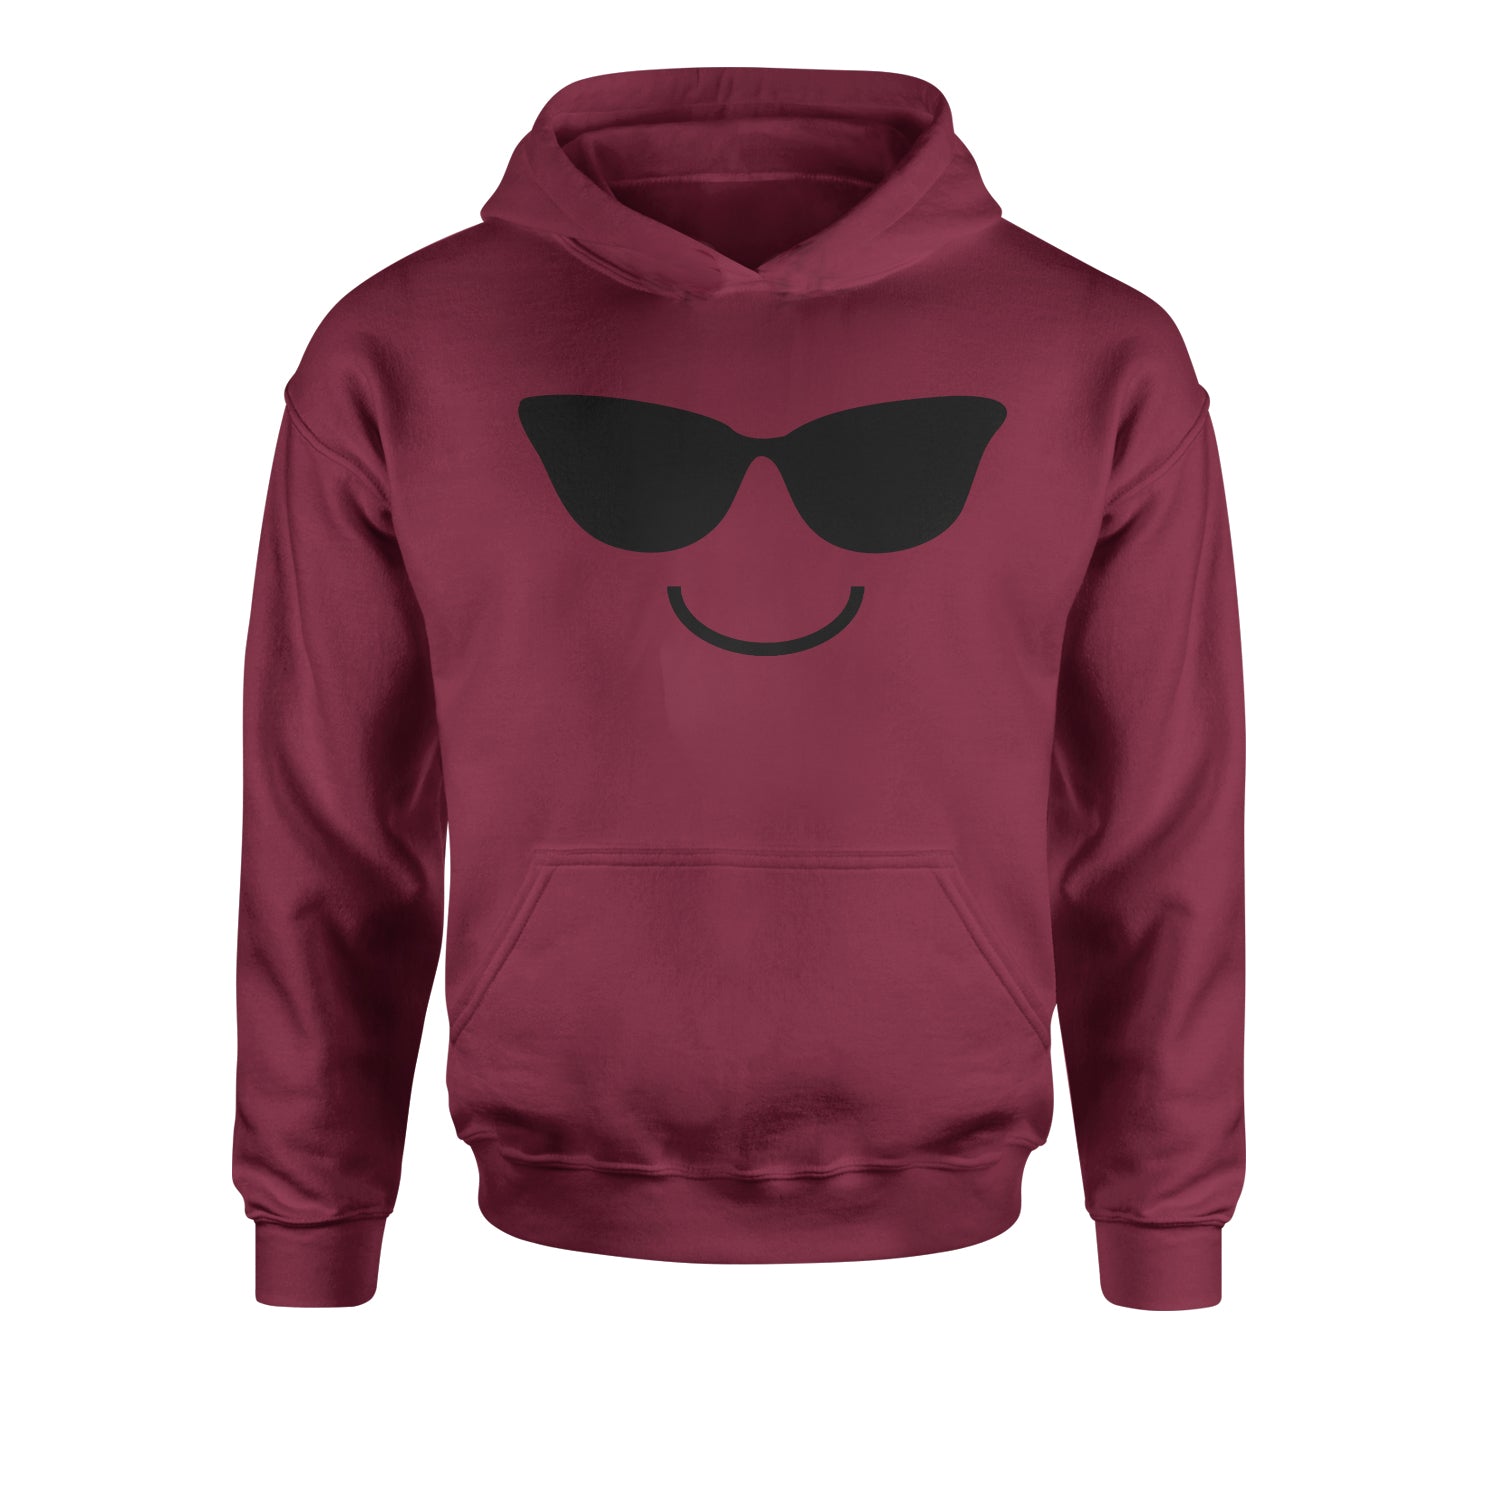 Emoticon Sunglasses Smile Face Youth-Sized Hoodie cosplay, costume, dress, emoji, emote, face, halloween, smiley, up, yellow, youth-sized by Expression Tees